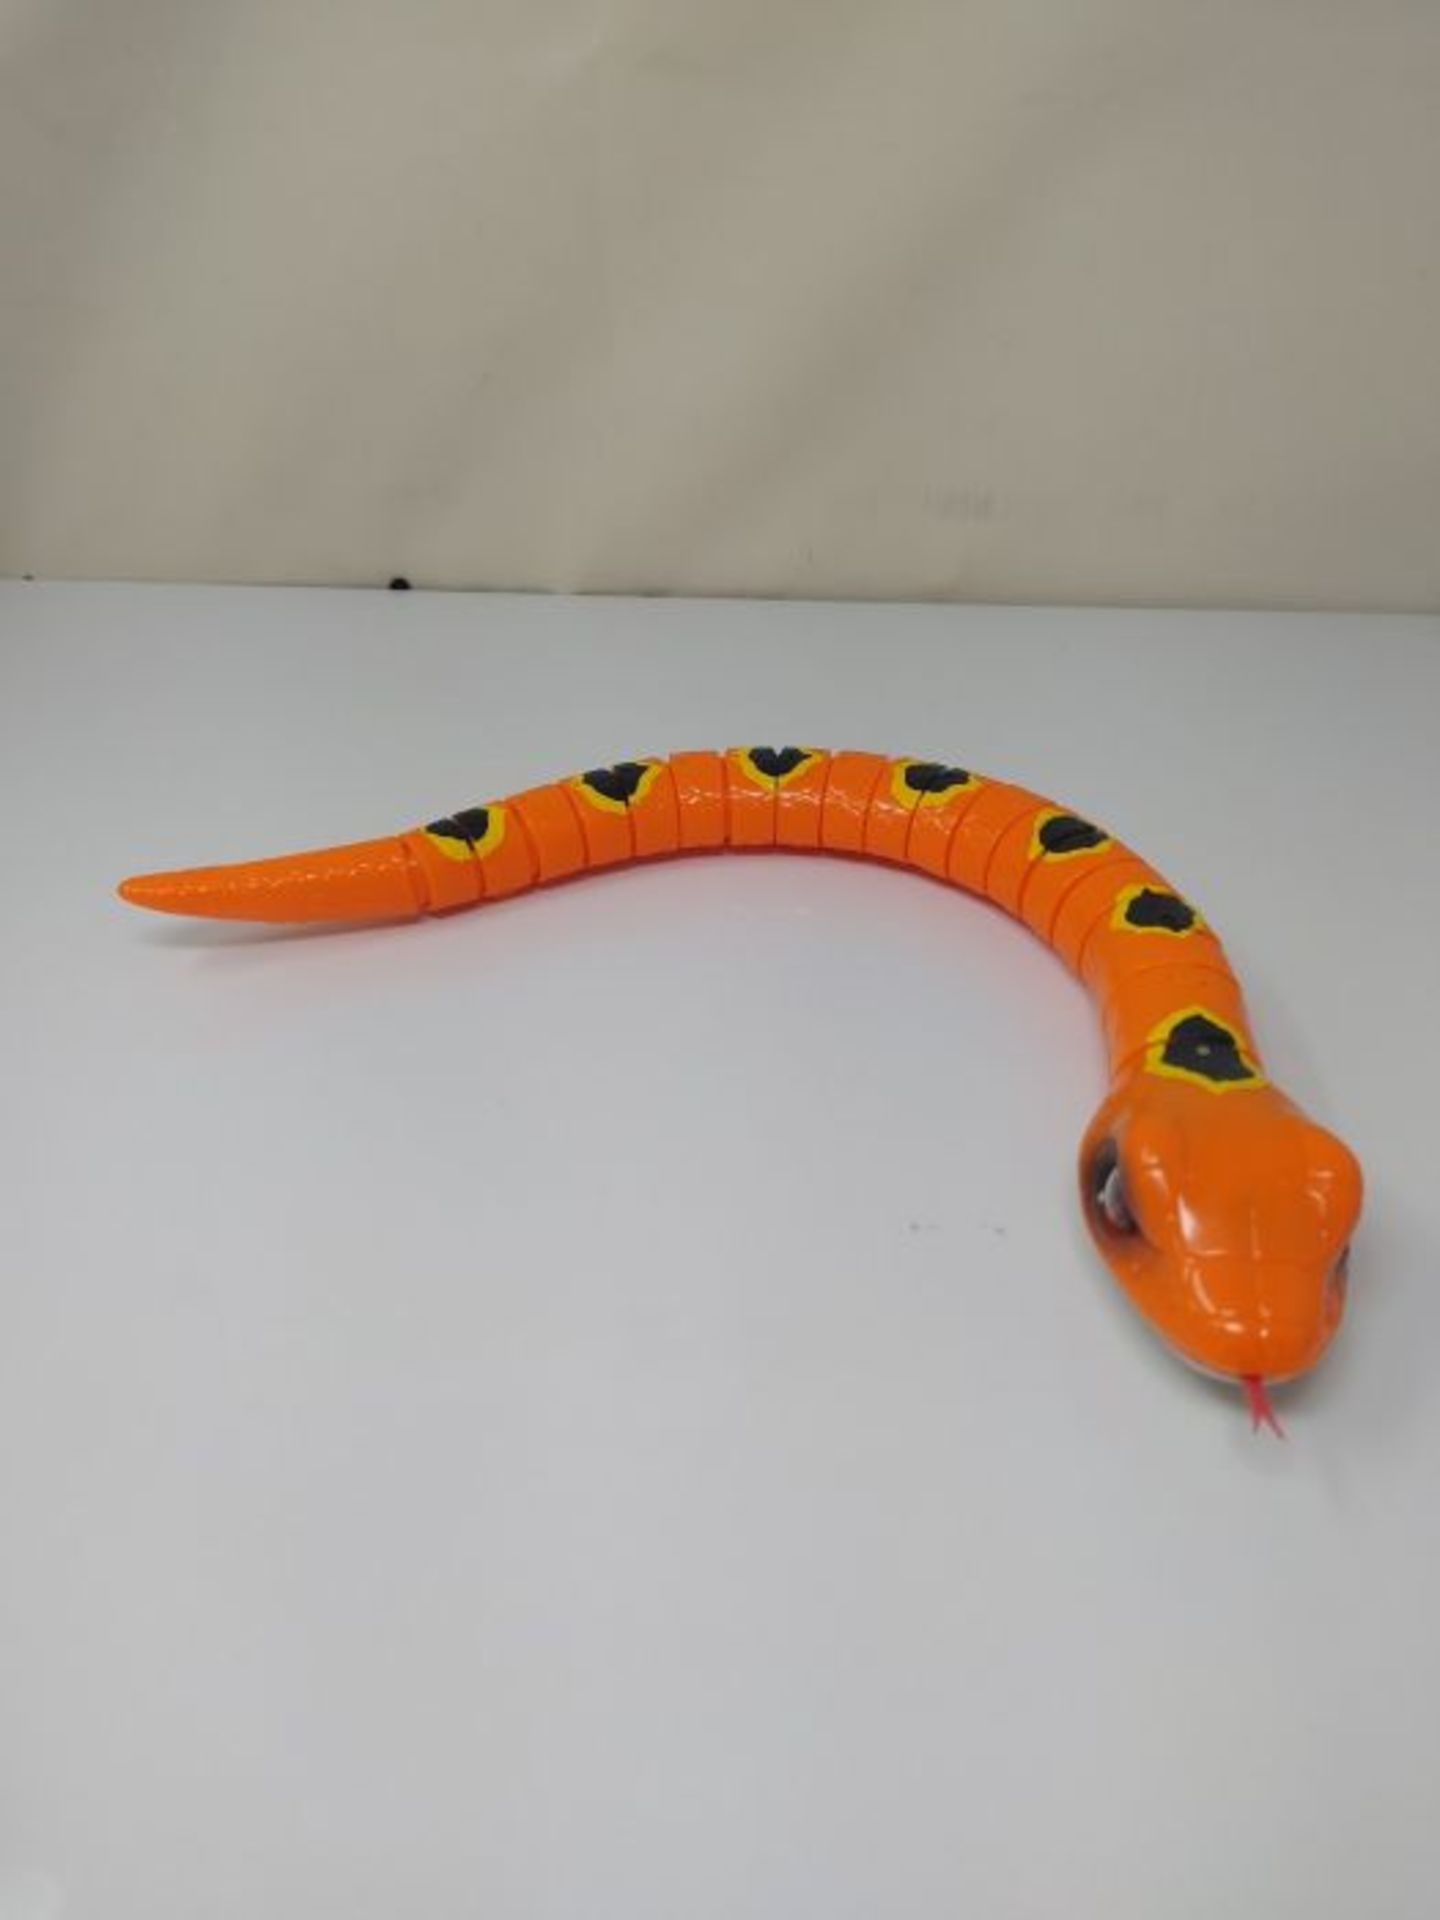 ZURU Robo Alive Slithering Snake Battery-Powered Robotic Toy, Green , One Size - Image 2 of 2